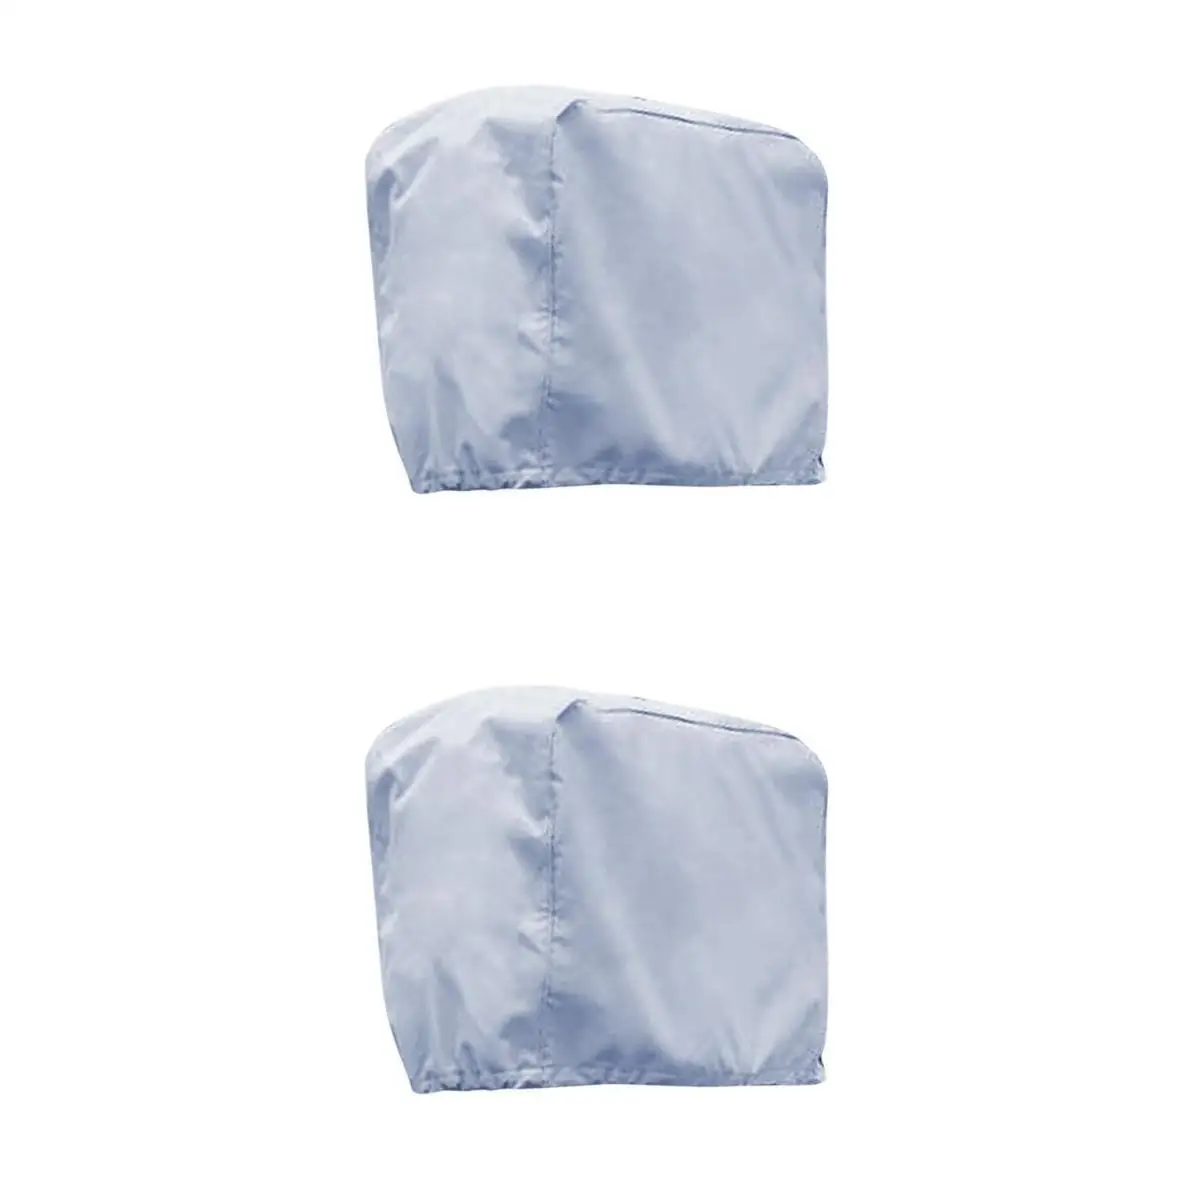 2x Outboard Motor Engine Cover Protector for 10-45HP & 30-90HP Engines